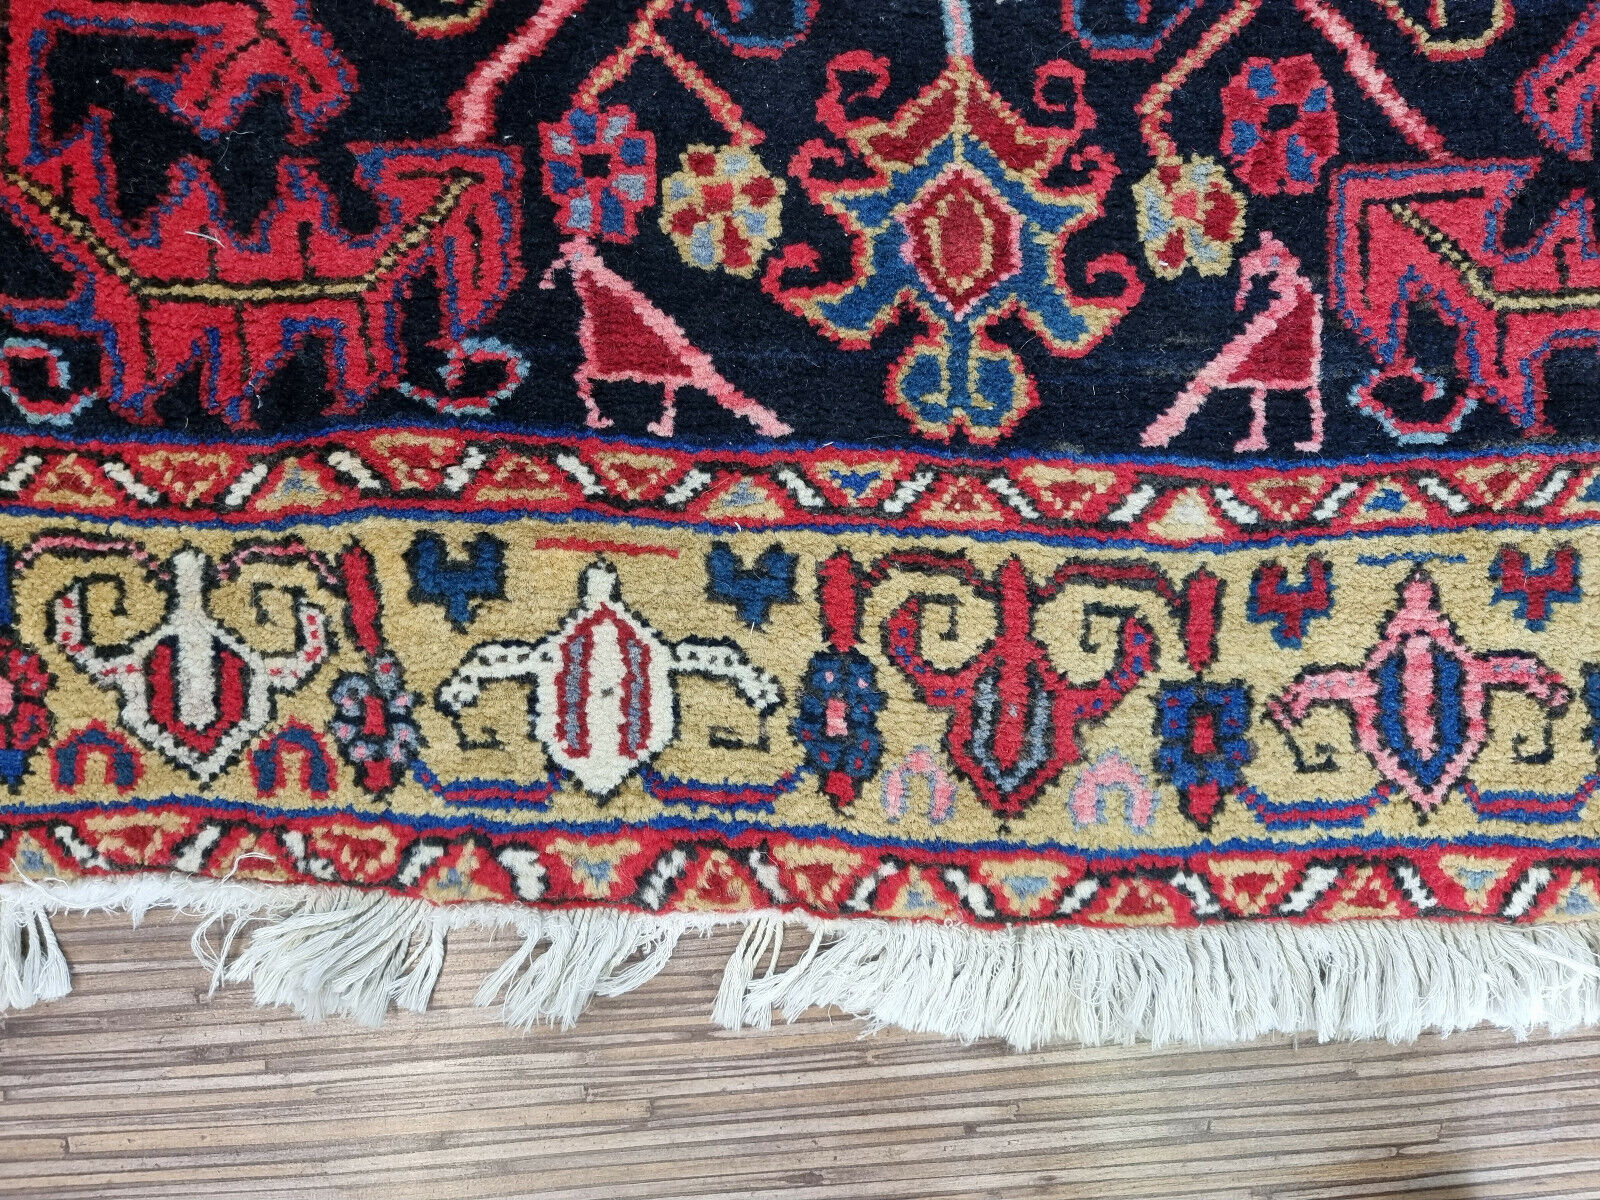 Close-up of floral motifs on Handmade Antique Persian Heriz Runner Rug - Detailed view highlighting the intricate floral motifs integrated into the rug's pattern.